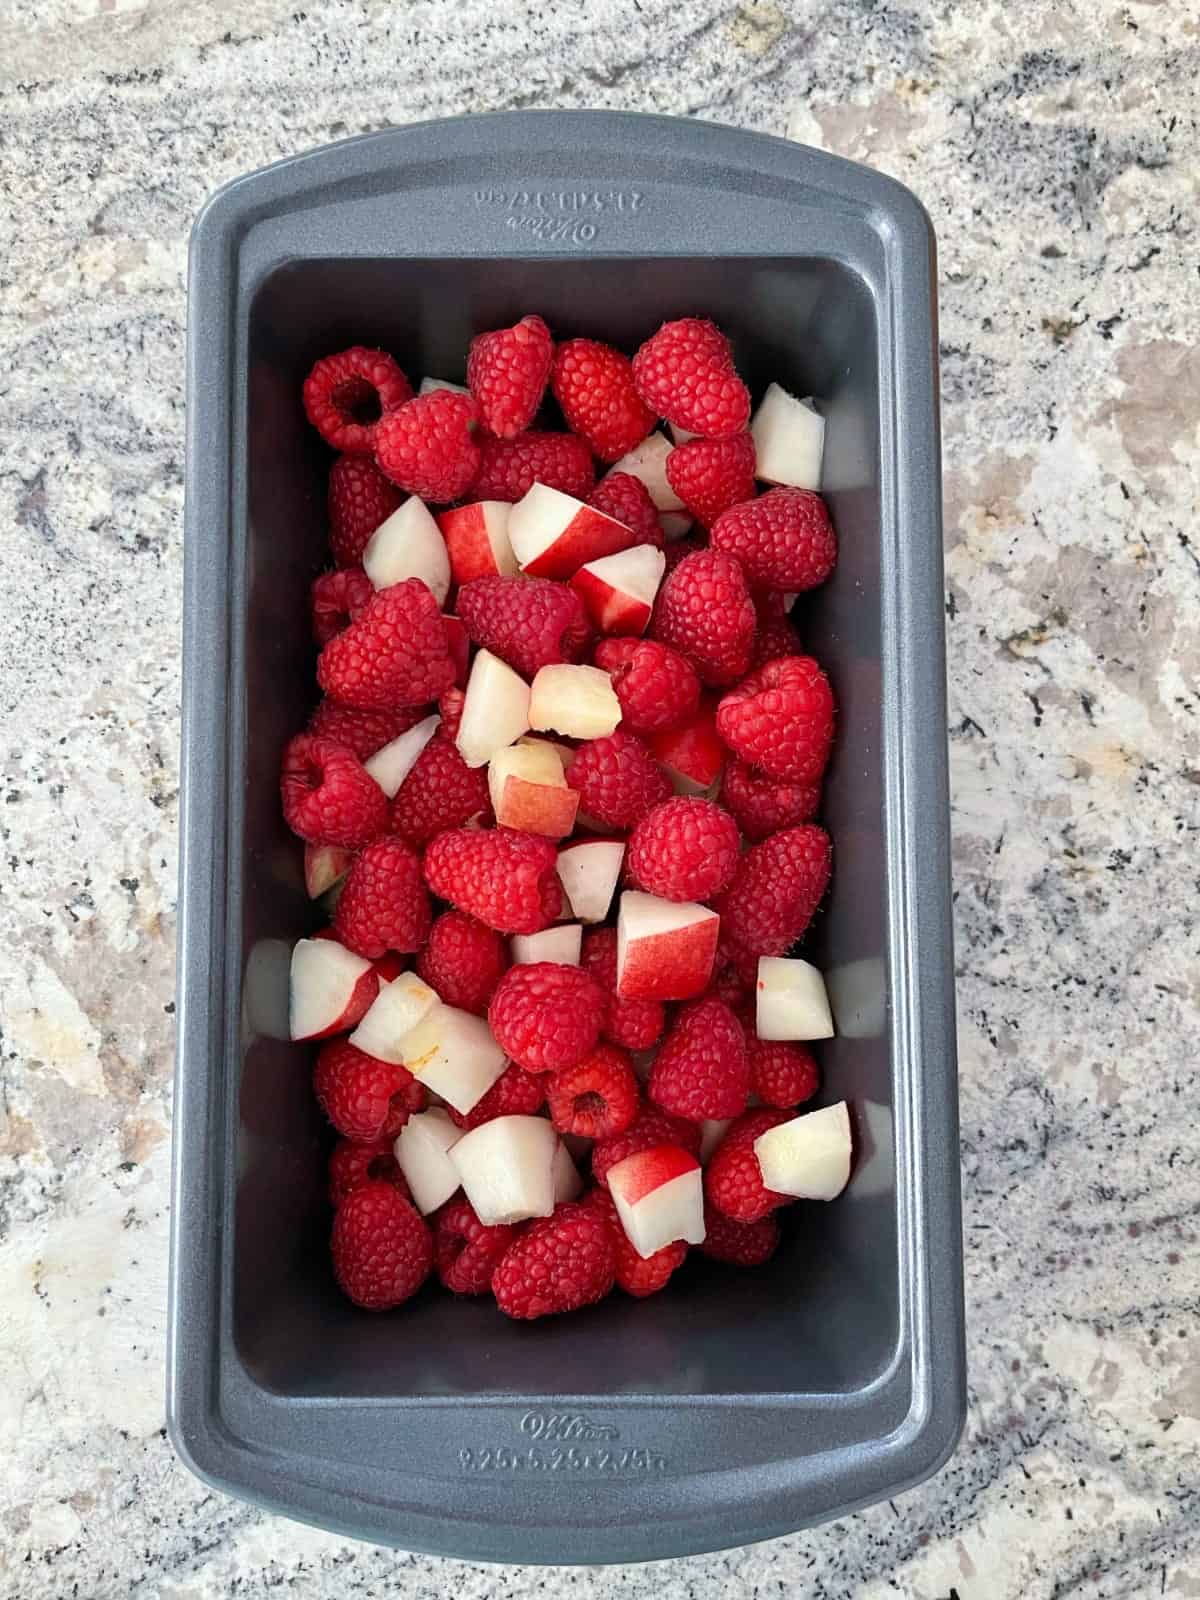 Chopped nectarines and raspberries in loaf pan.